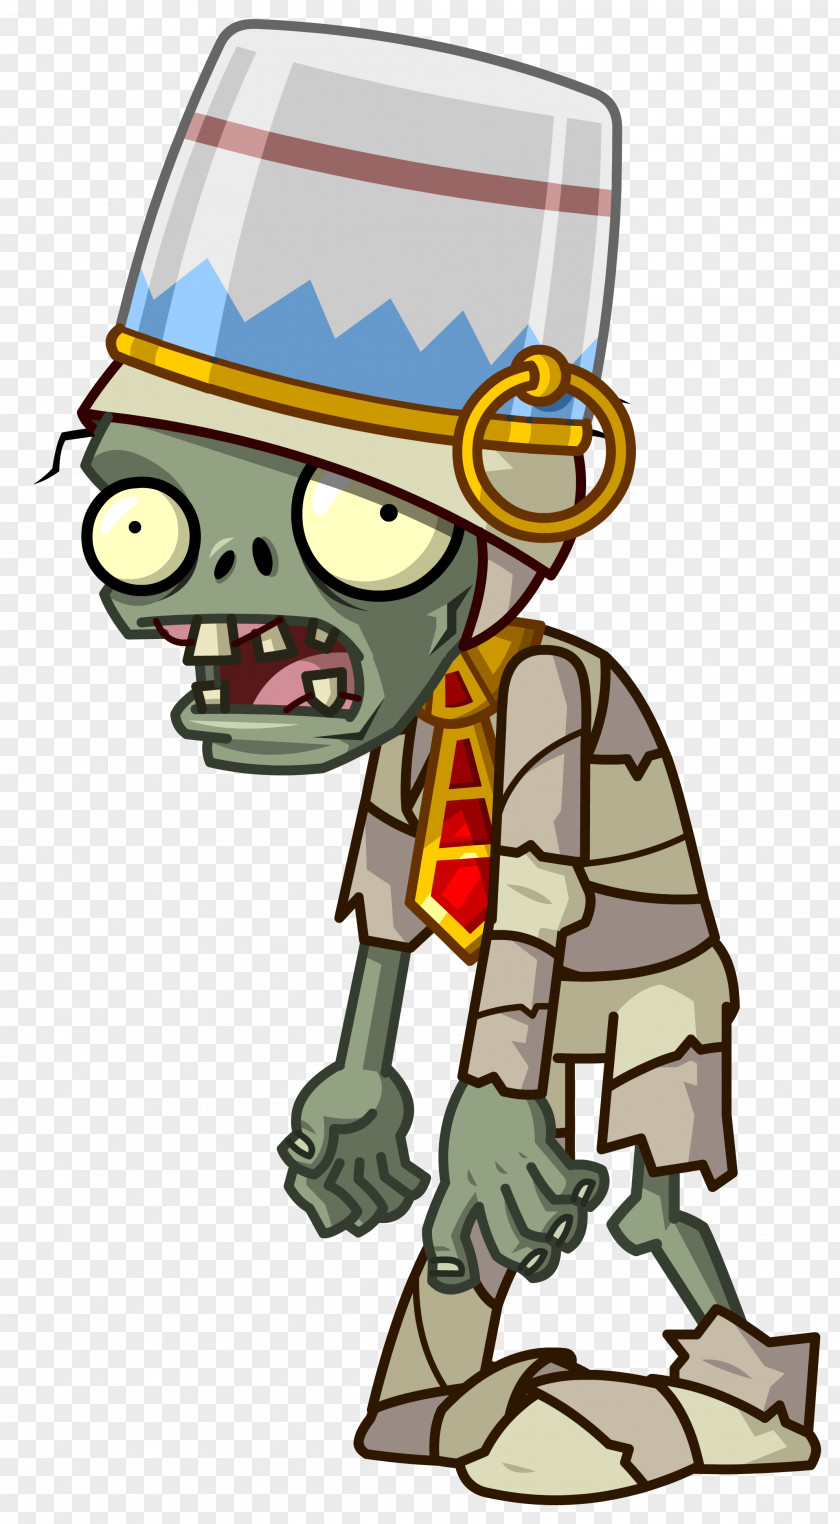 Plants Vs Zombies Vs. 2: It's About Time Video Game PopCap Games PNG